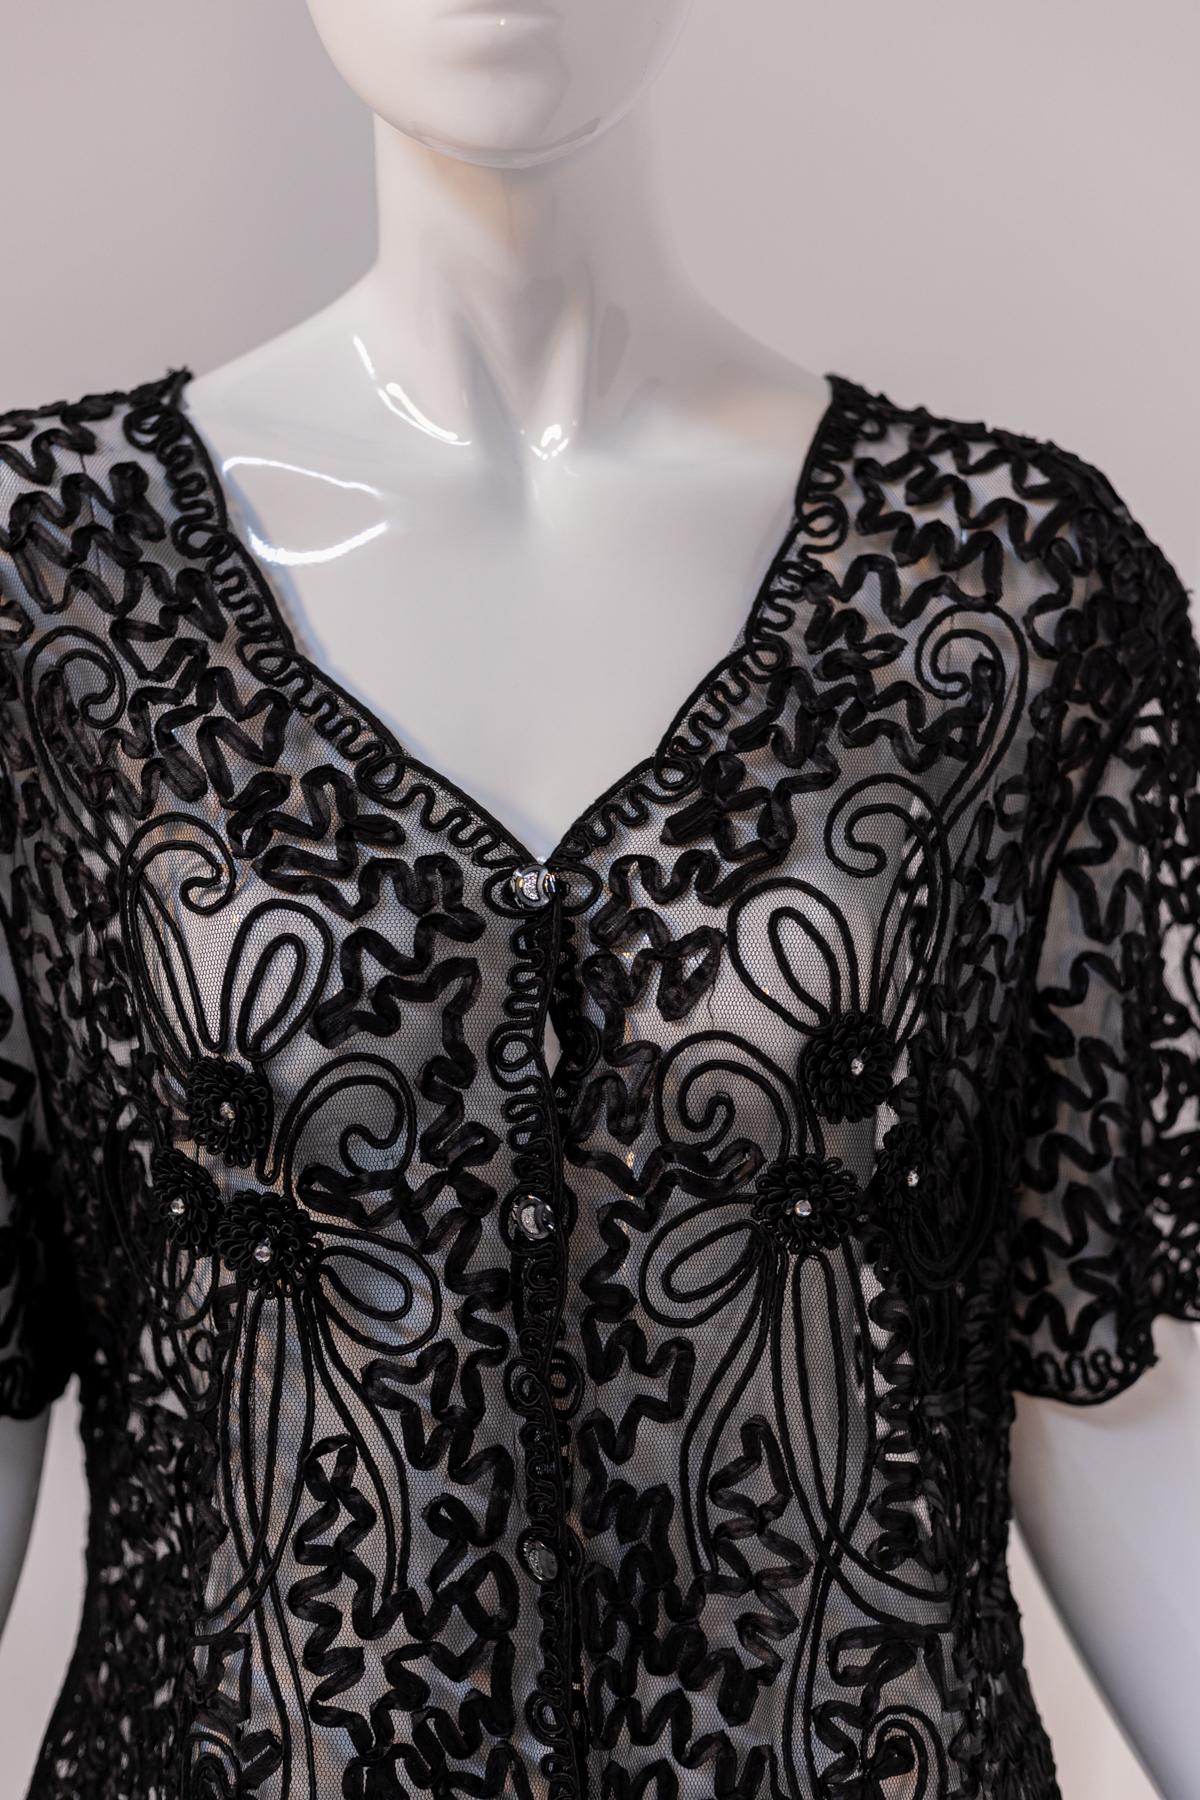 Yilibeier Eclectic Sheer Black Blouse For Sale 3